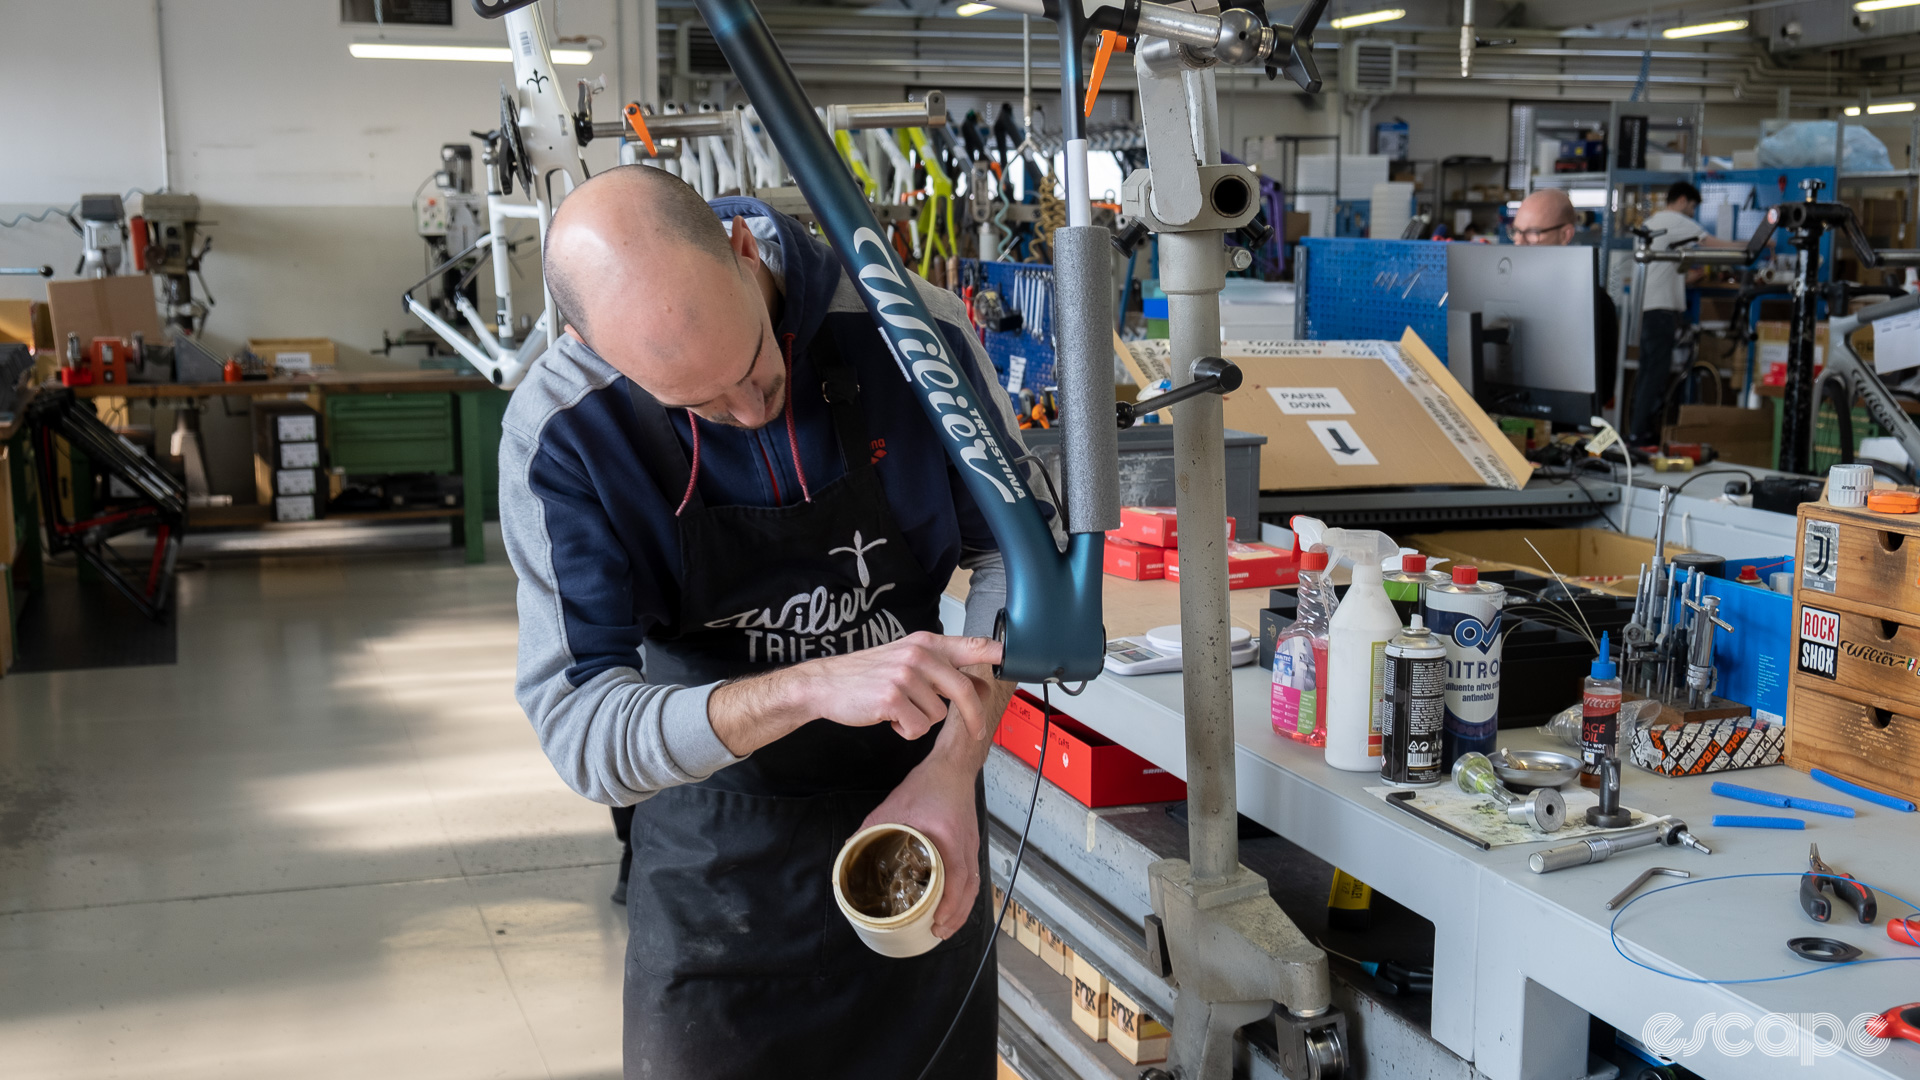 The photo shows a mechanic adding grease to a frame in preparation for adding the headset bearing.